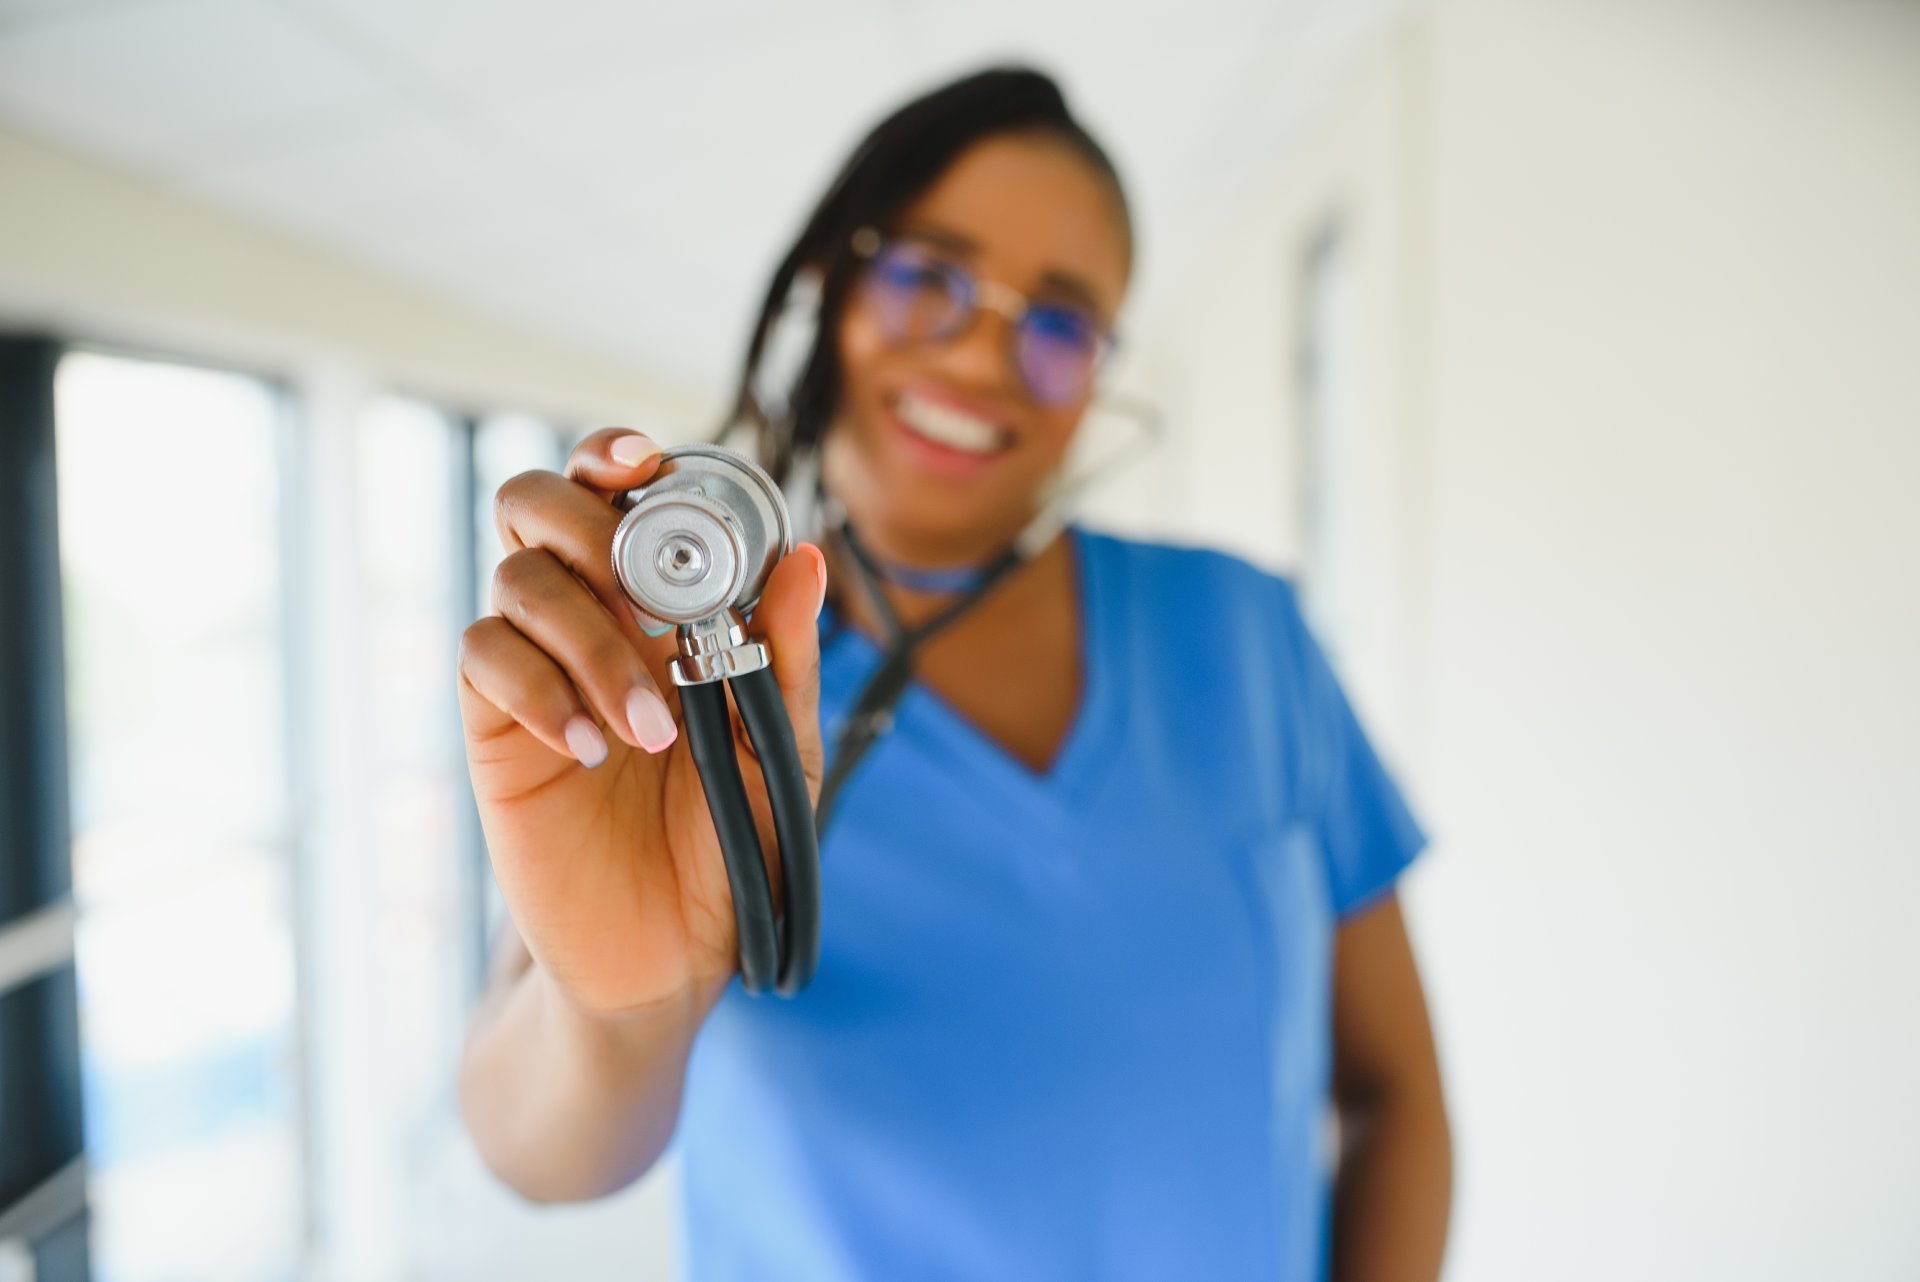 A female nurse holds her stethoscope up to the camera and smiles.